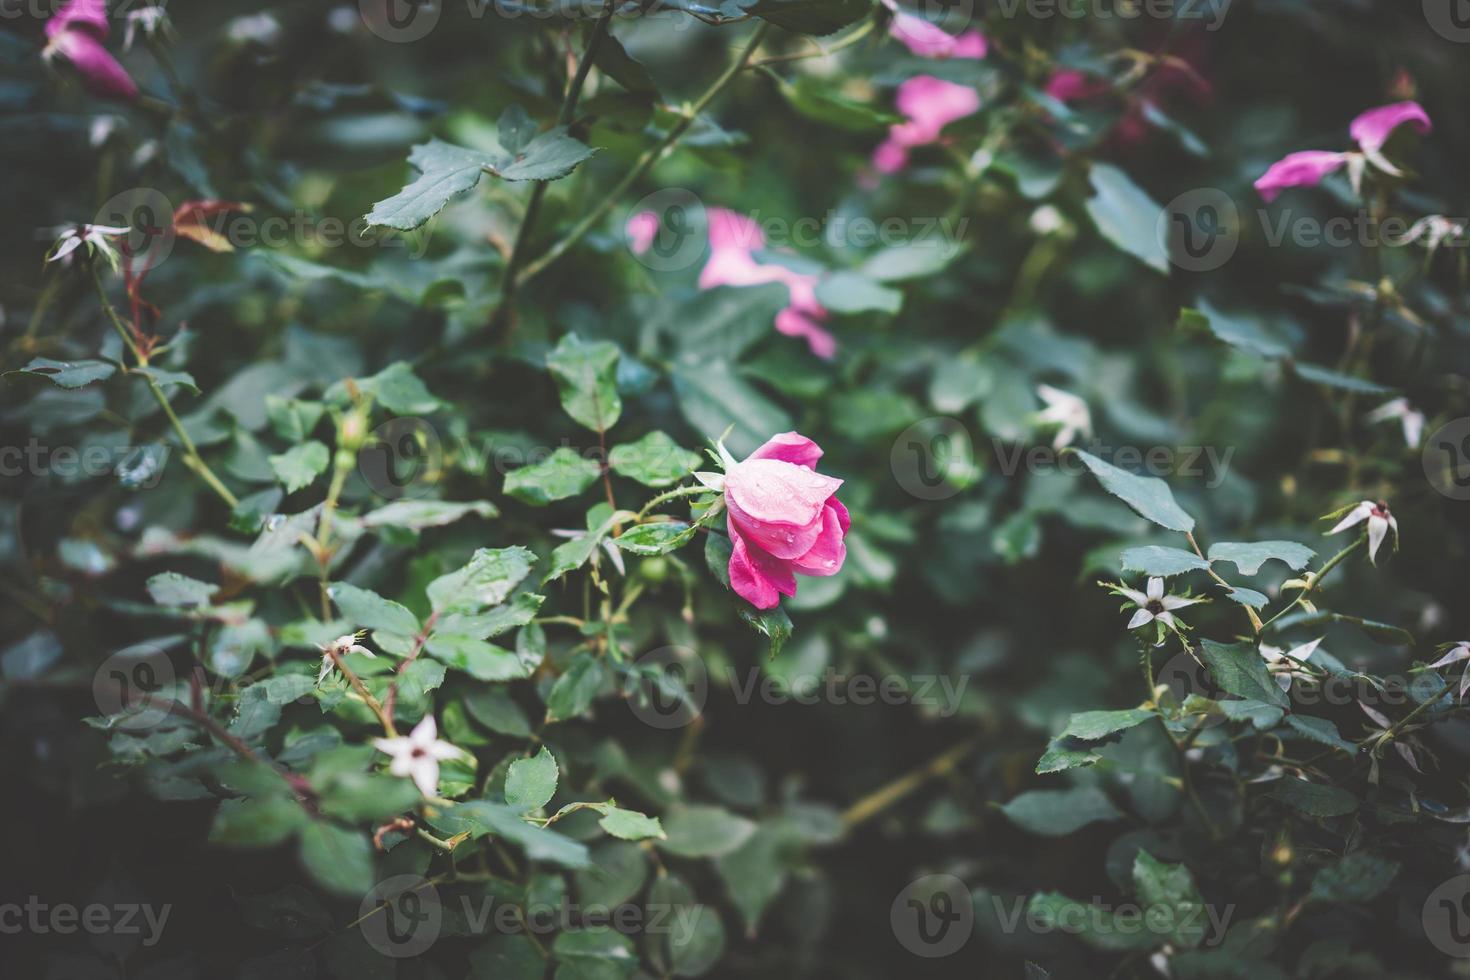 Tiny pink rose surrounded by foliage photo